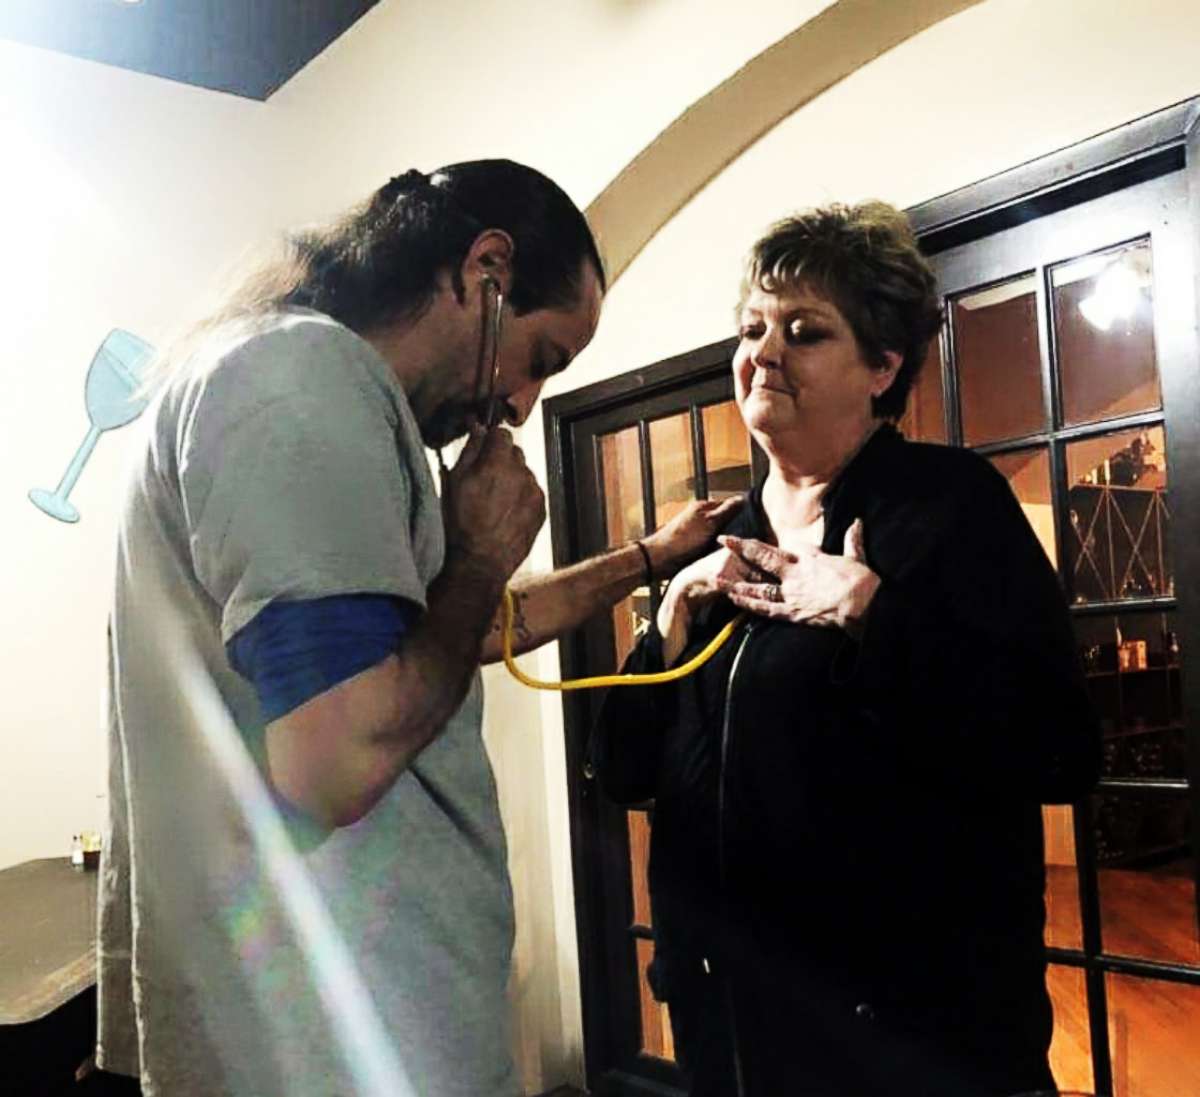 PHOTO: Kristi Richard Russ holds a stethoscope to her chest so that Jordan Spahn of Brenham, Texas, can listen to his dead son's heartbeat in a photo shared via Facebook on Feb. 10, 2020.